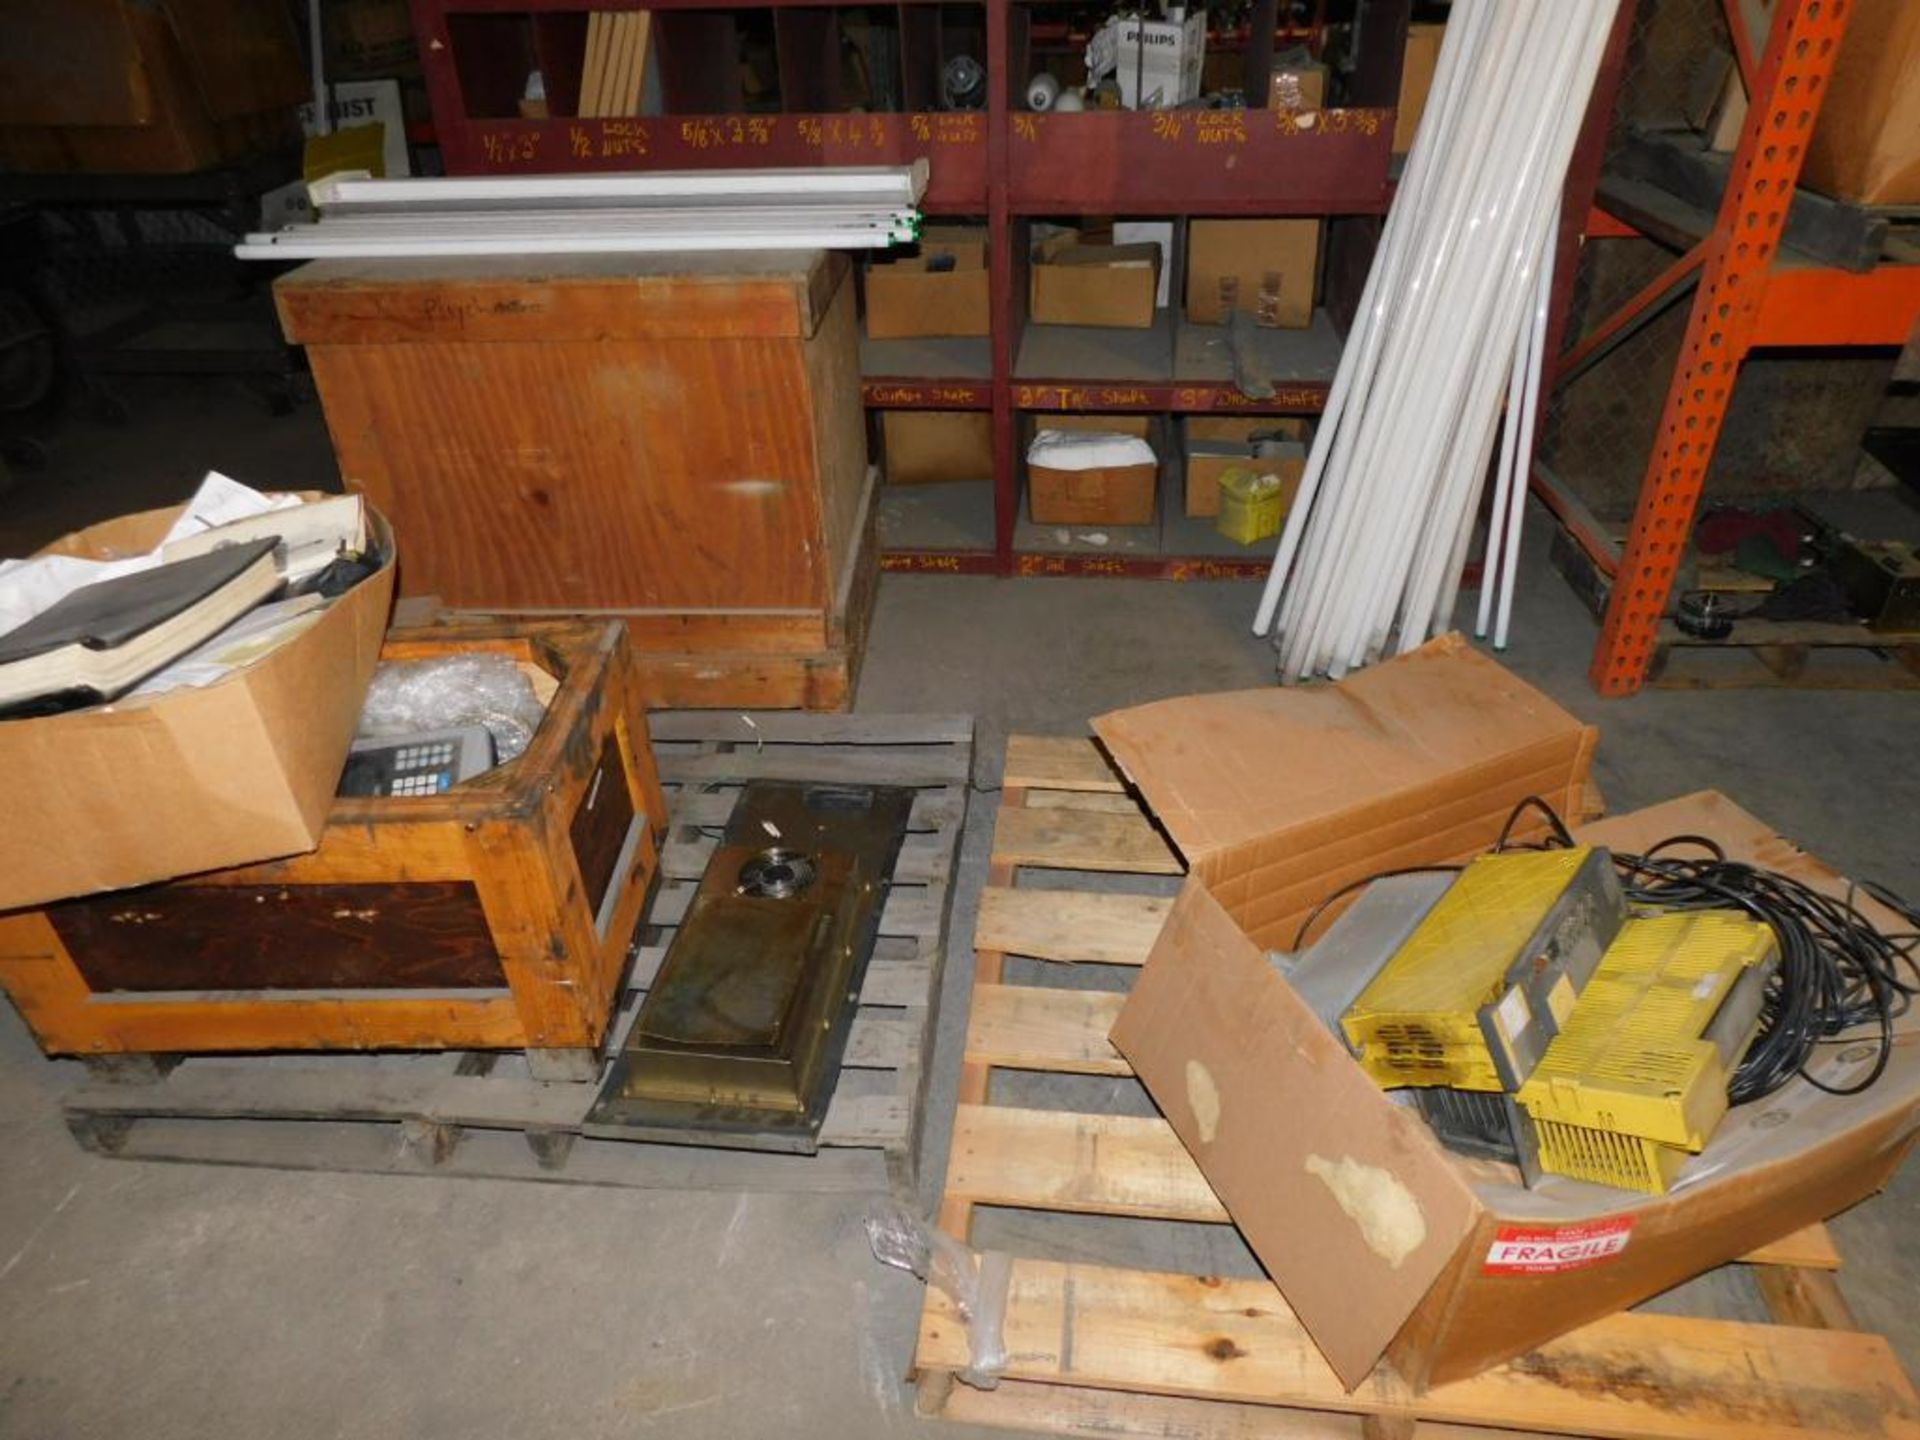 LOT: Contents of Maintenance Room: Fuse Boxes, Wire, Assorted Belts, Spare Machine Parts, - Image 9 of 13